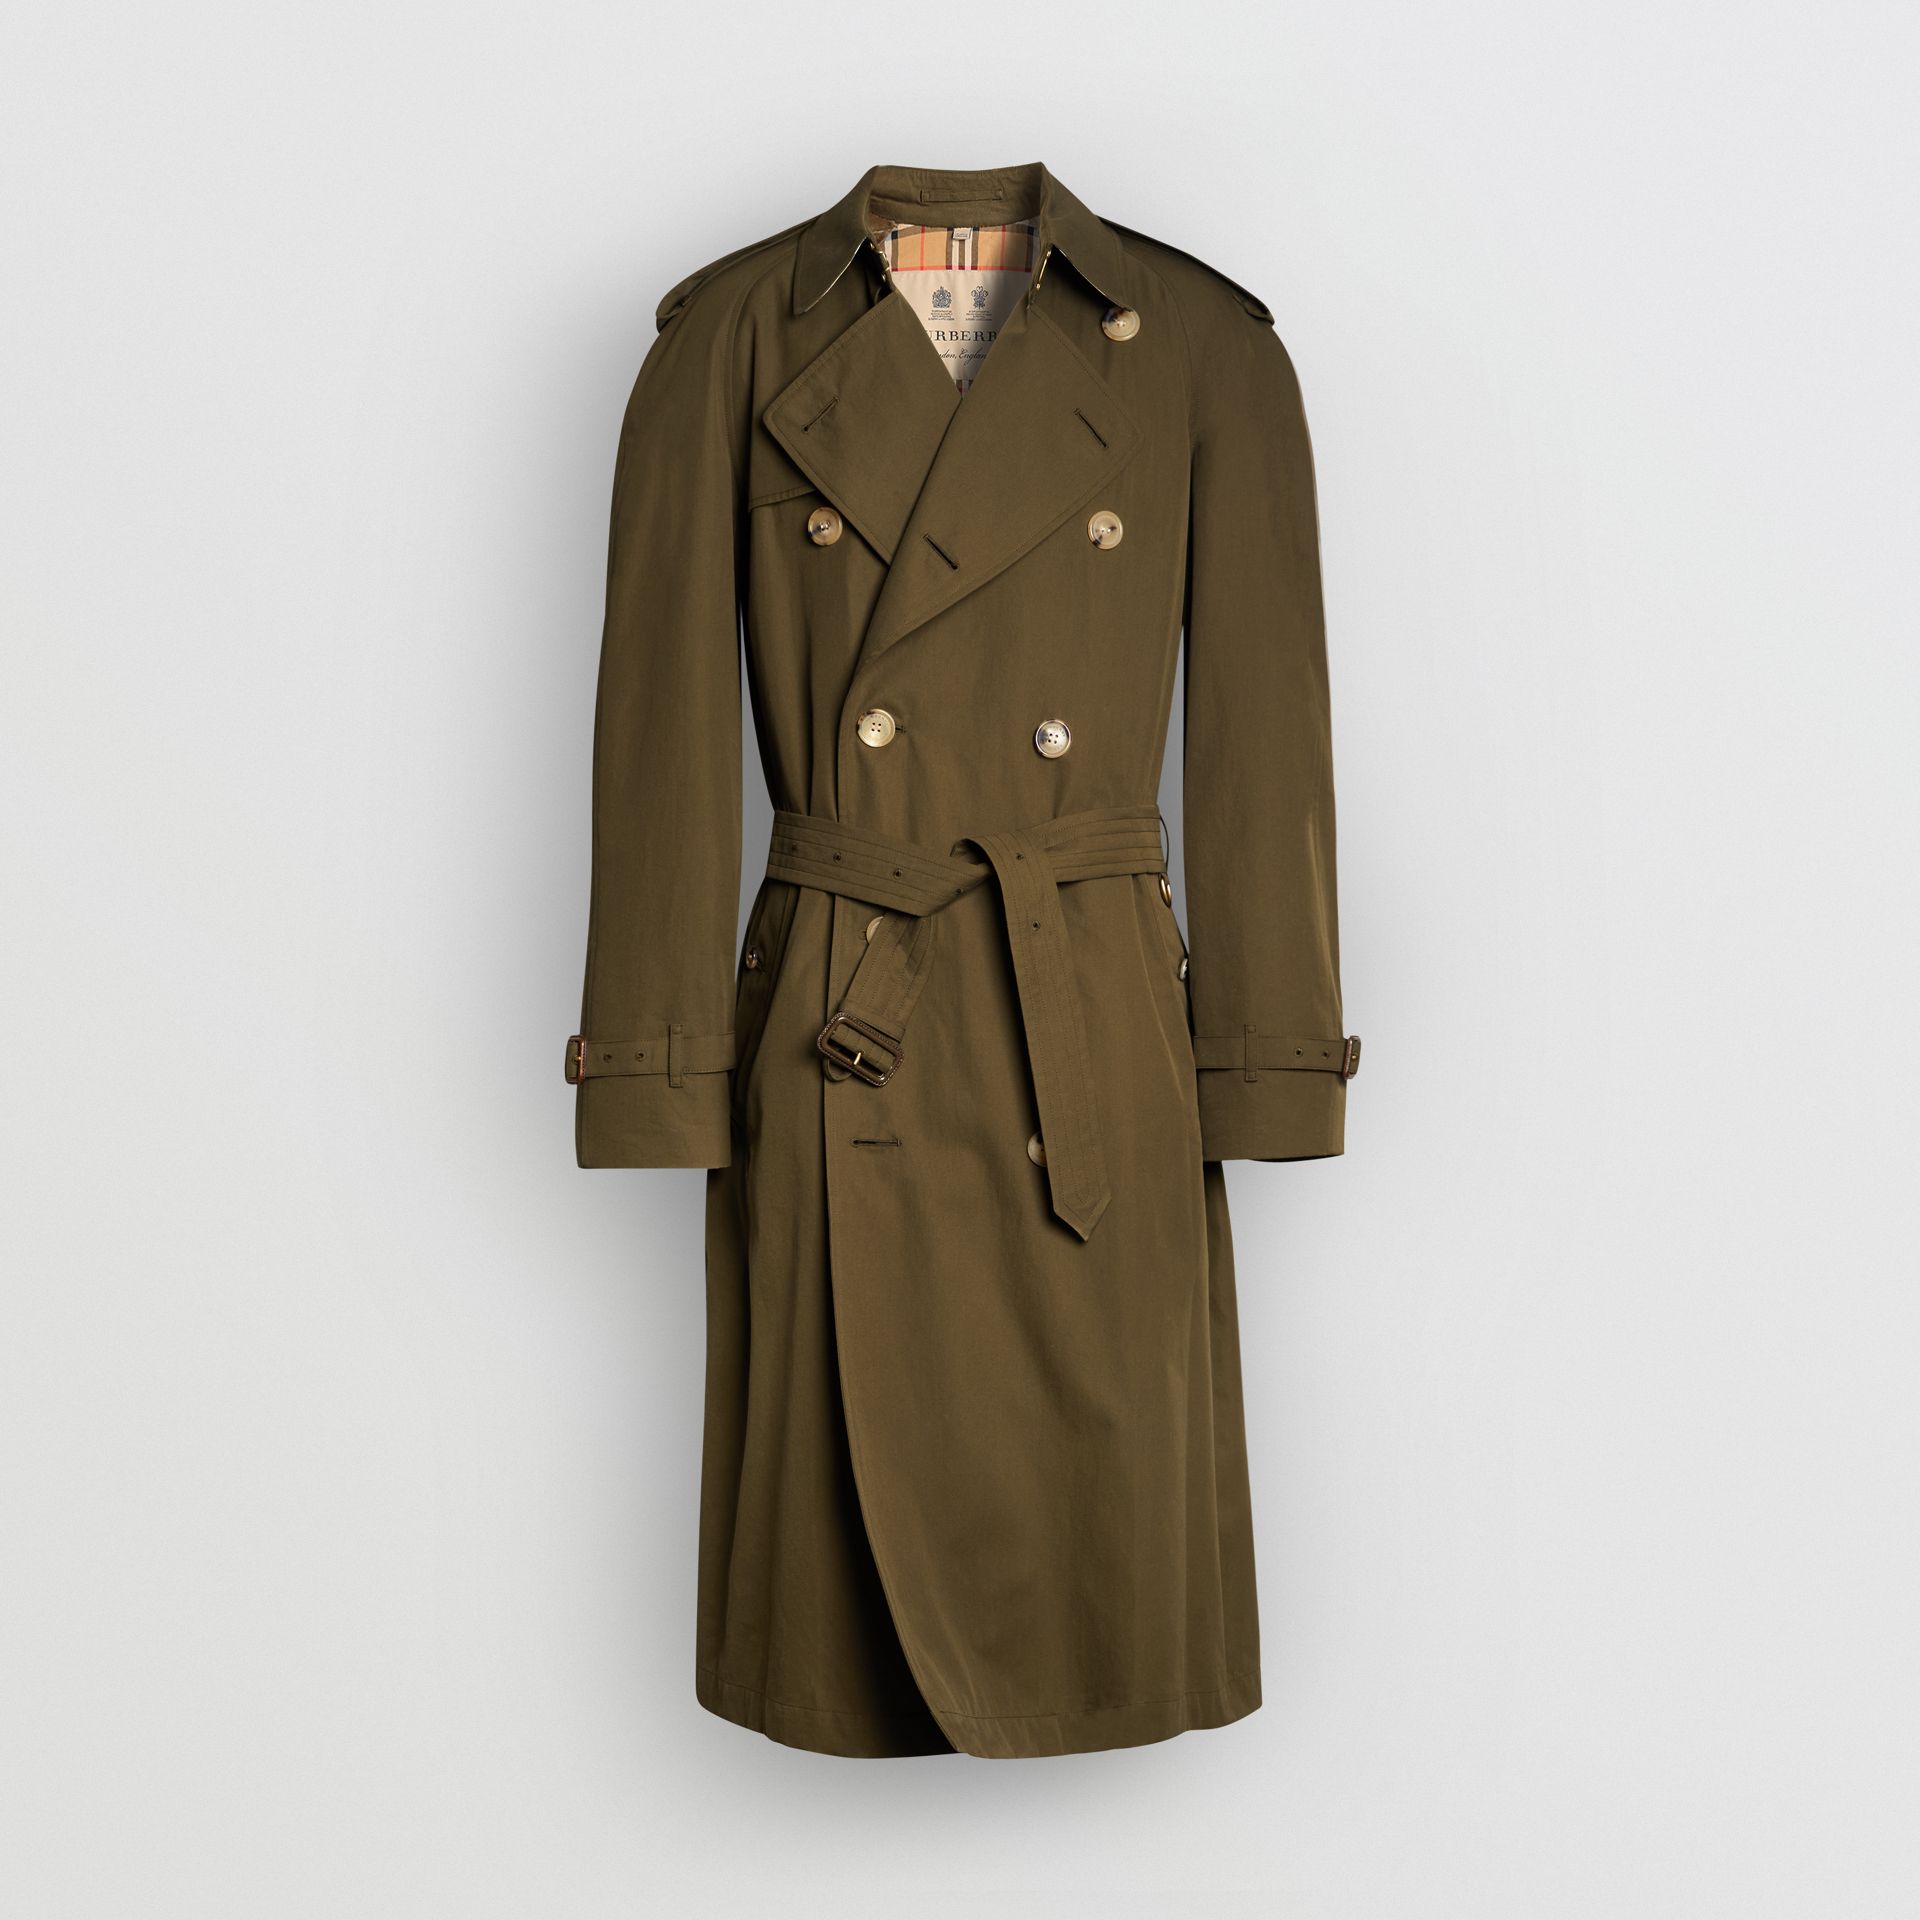 Burberry Westminster Heritage Trench Fashion Trends for Men for 2019